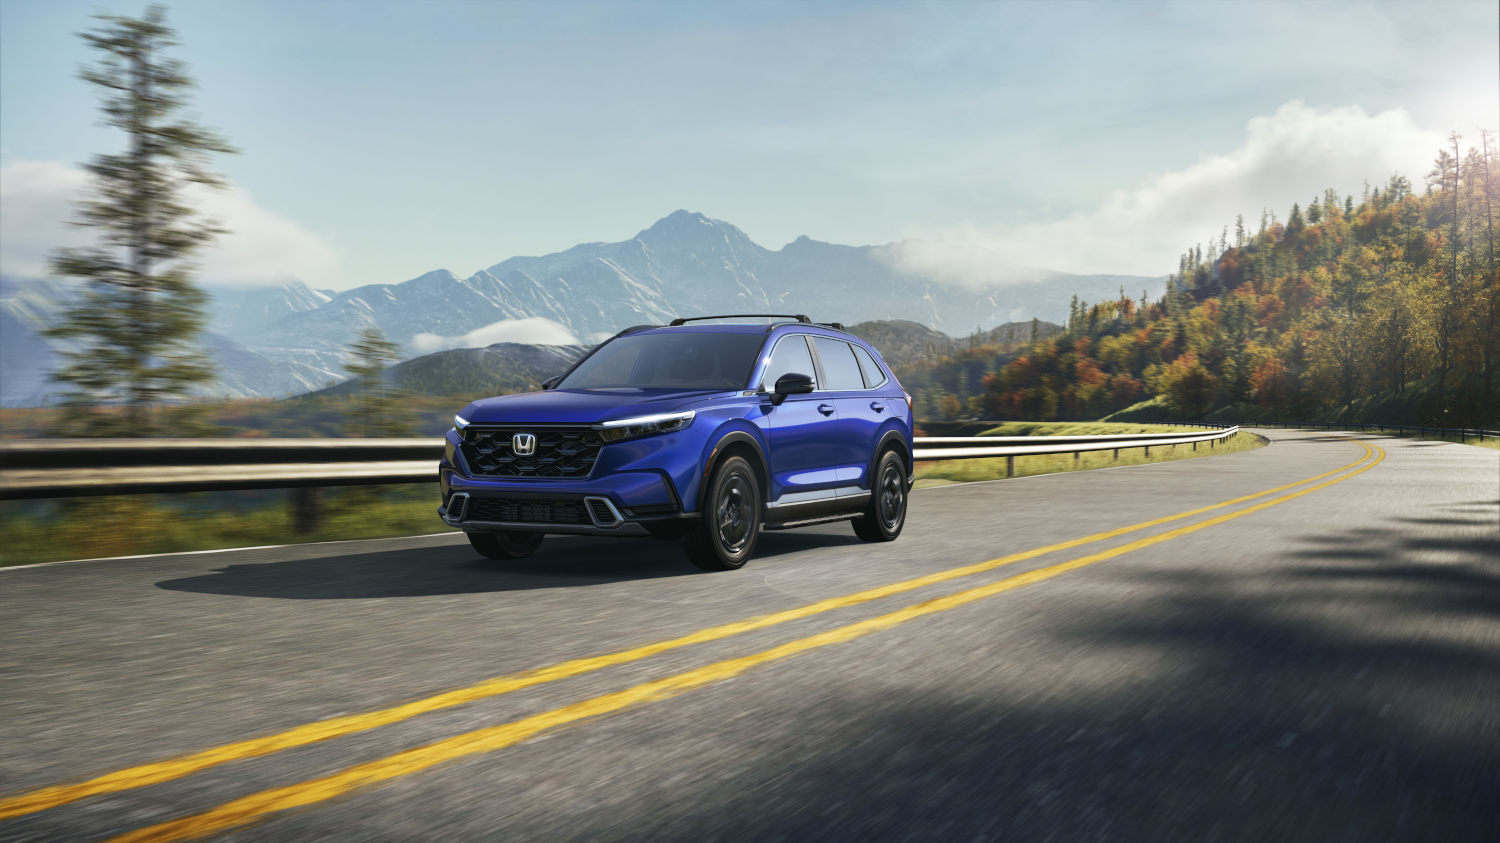 The most popular SUVs of 2023 include this Honda CR-V